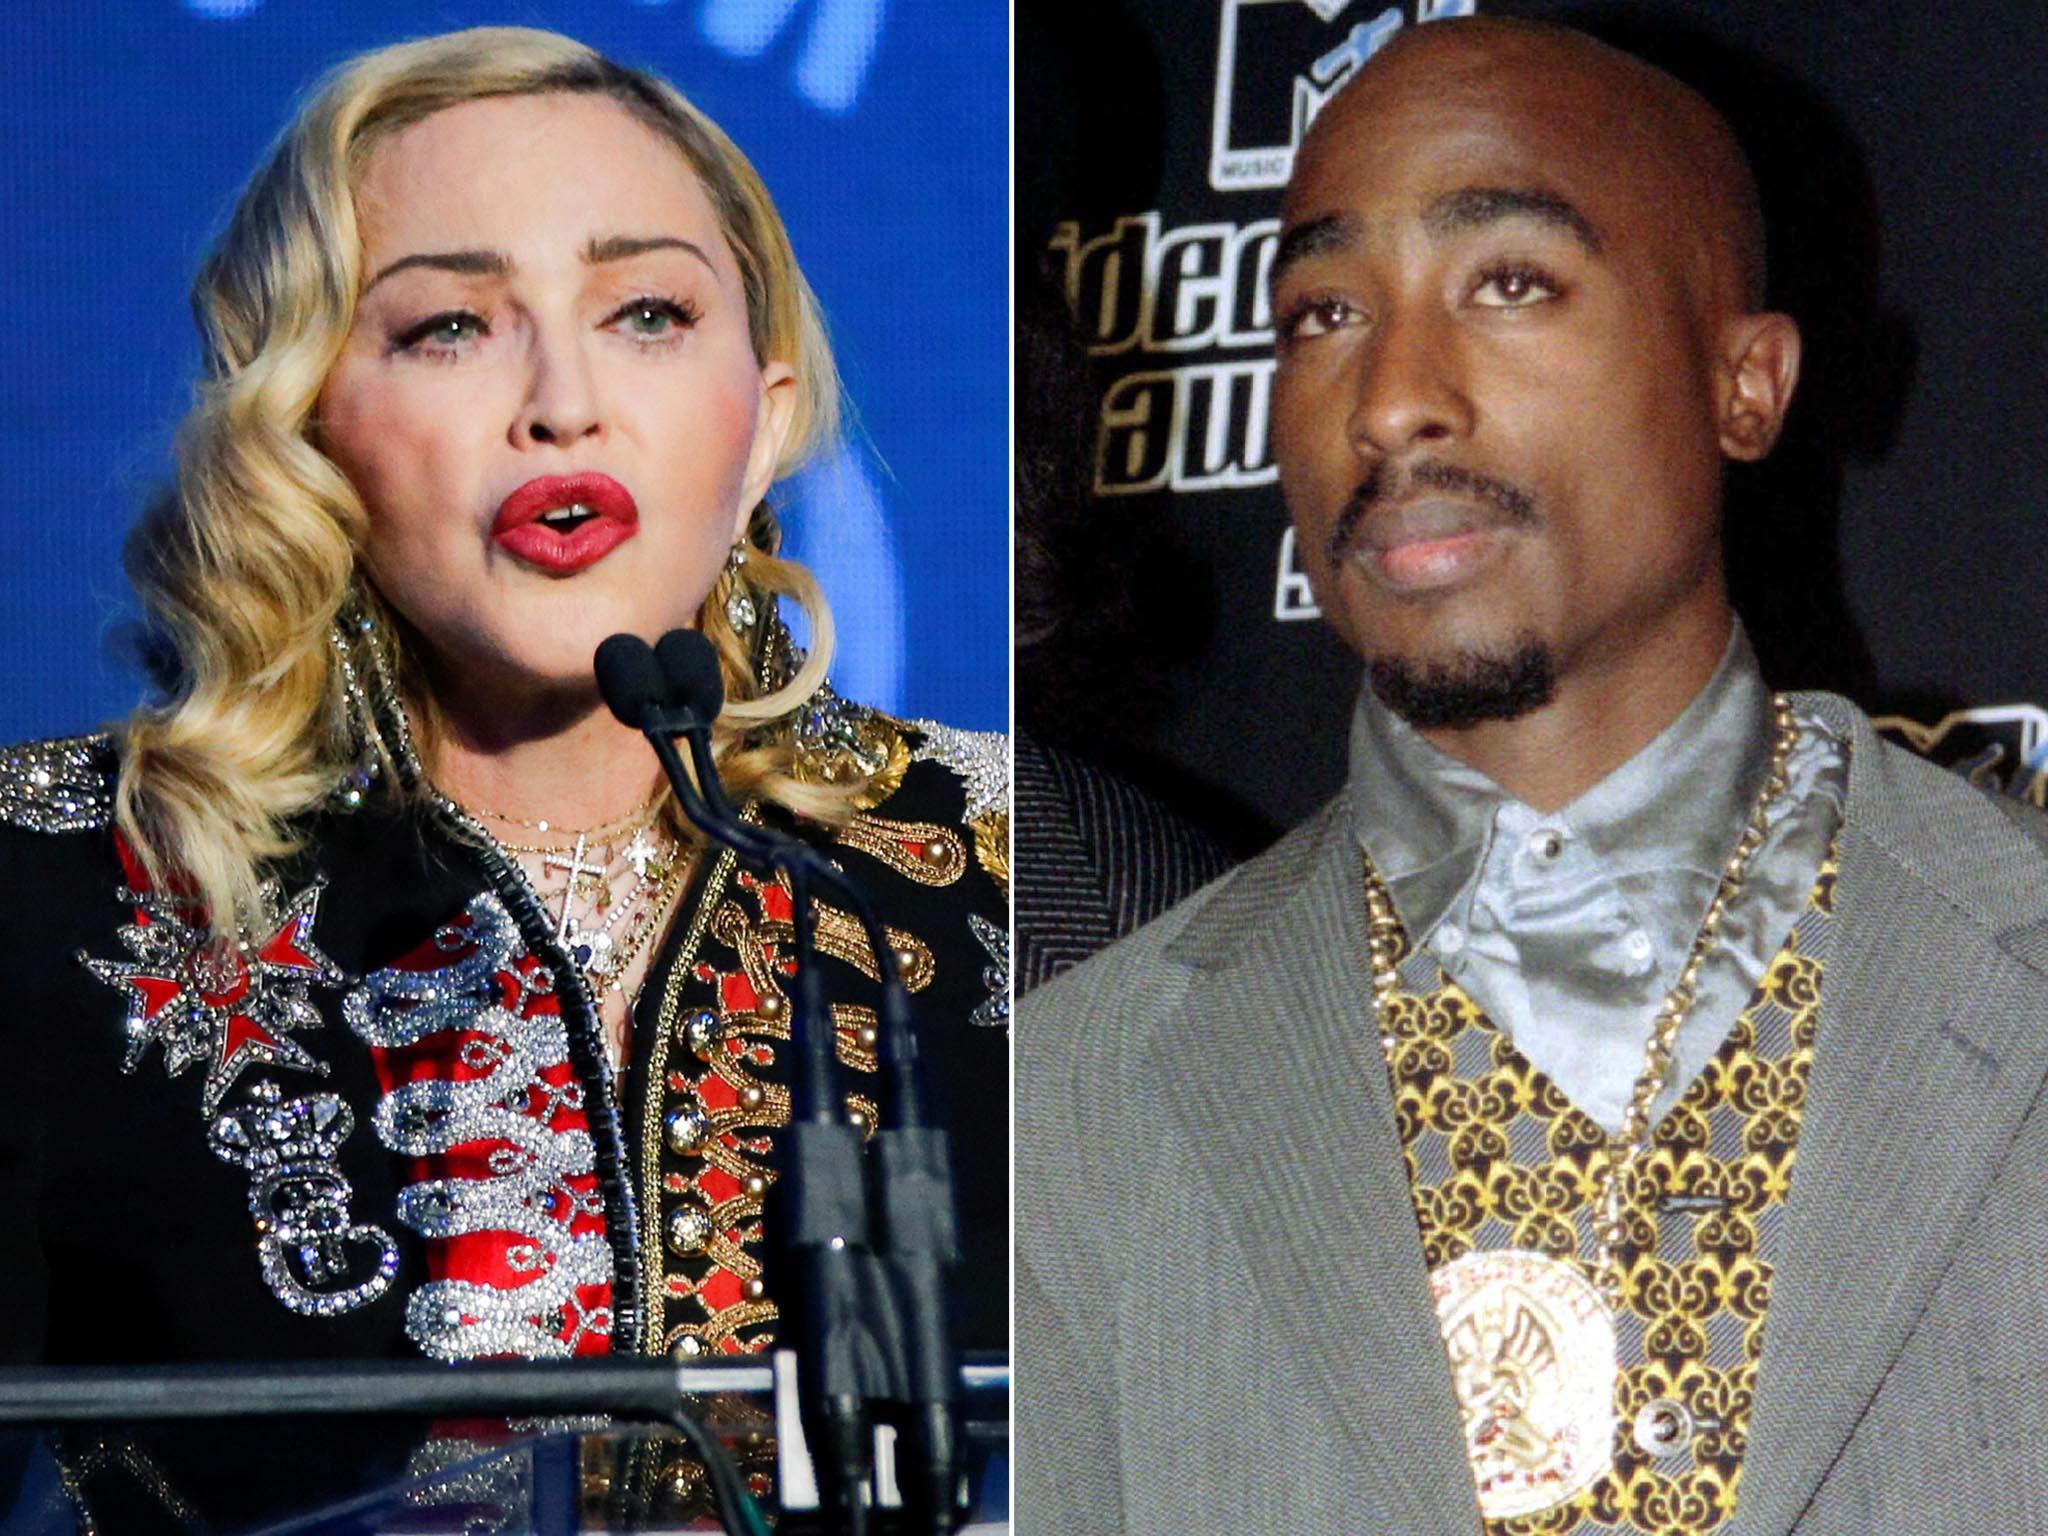 Tupac's Love Letter To Madonna To Be Auctioned, Could Go for $300K